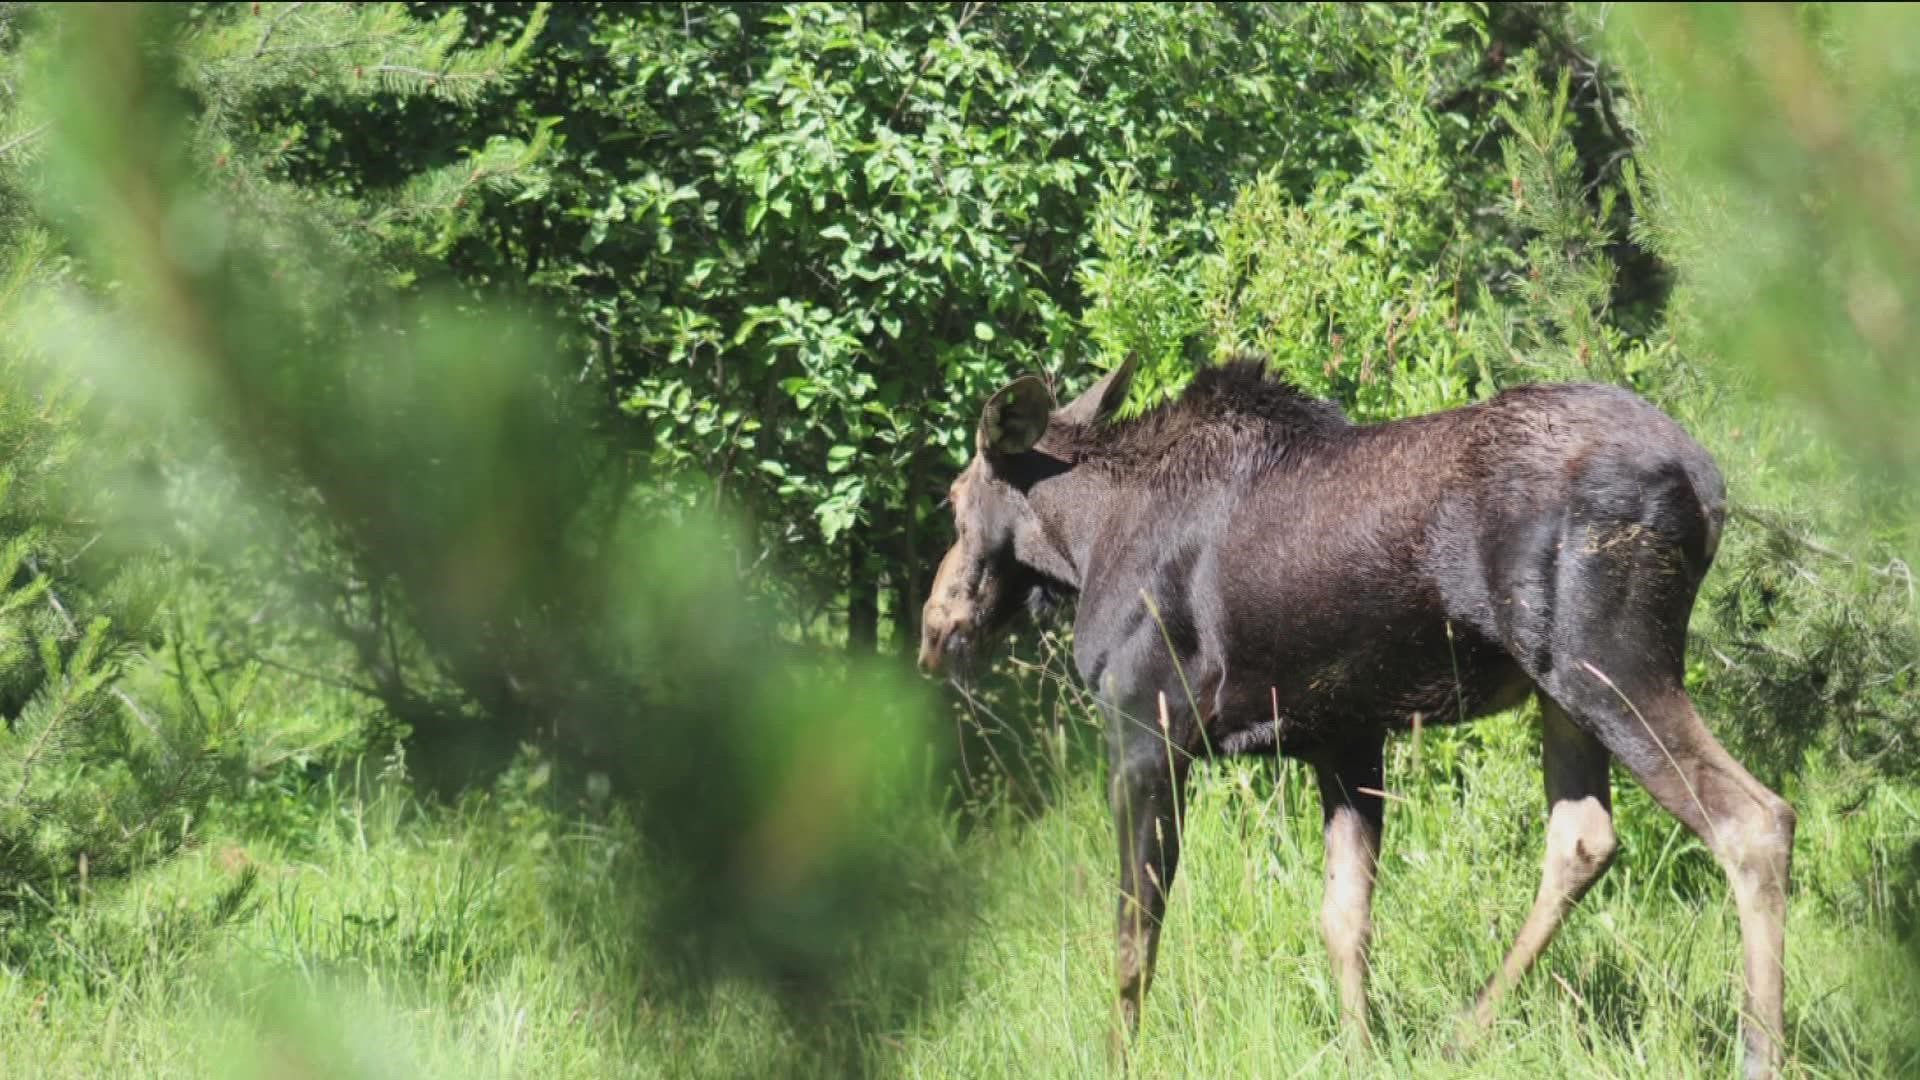 People are urged to be aware and keep distance, as moose encounters can be deadly. This is the second recent moose sighting in an Ada County neighborhood.